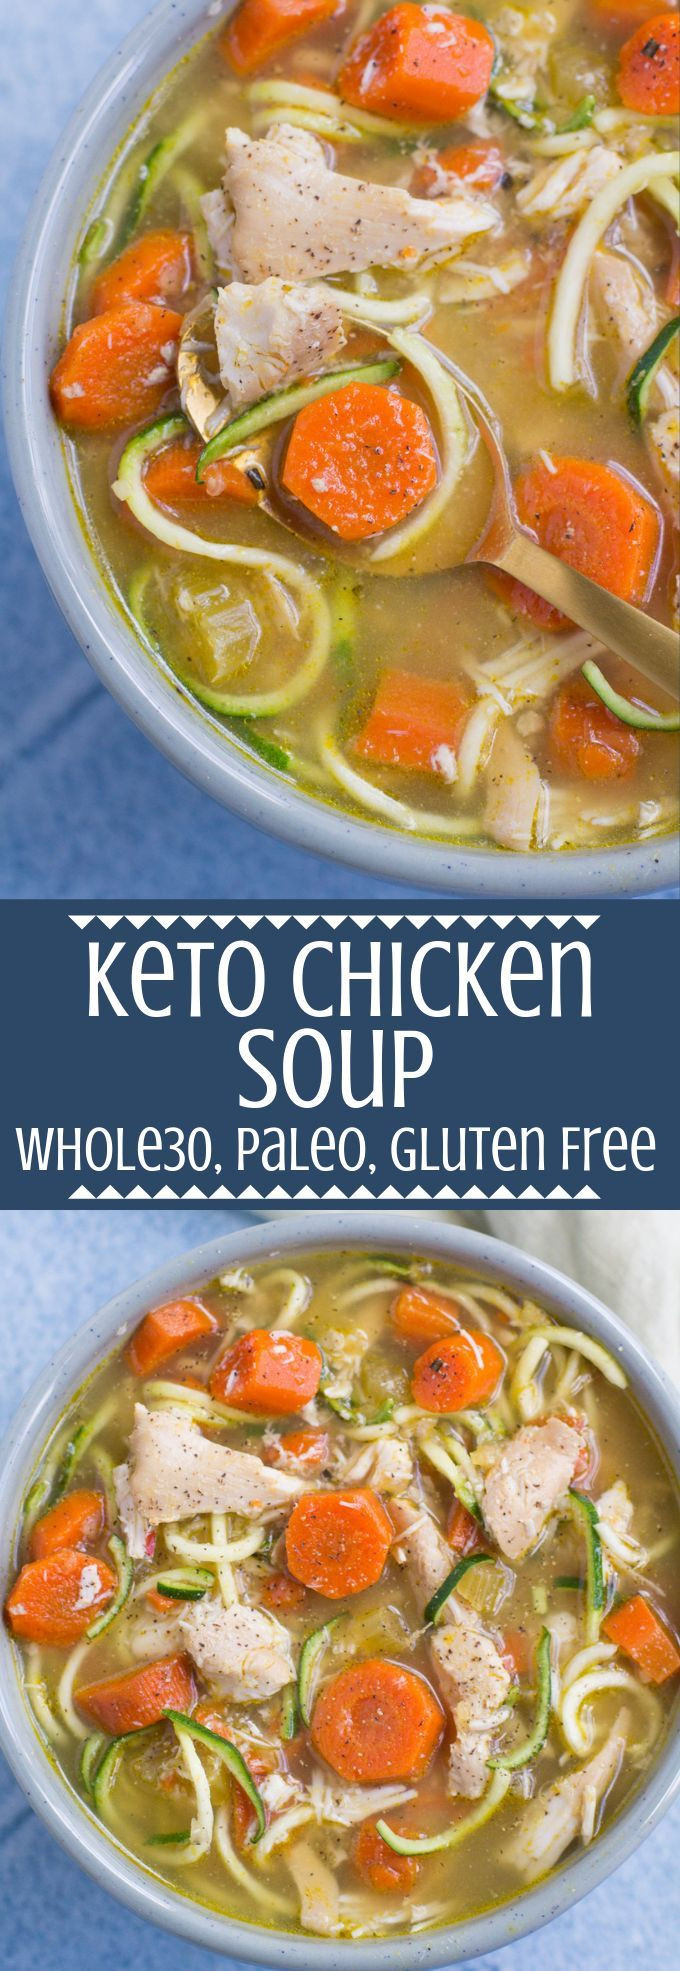 The 21 Best Ideas for Ketogenic Chicken soup Recipe - Best Recipes ...